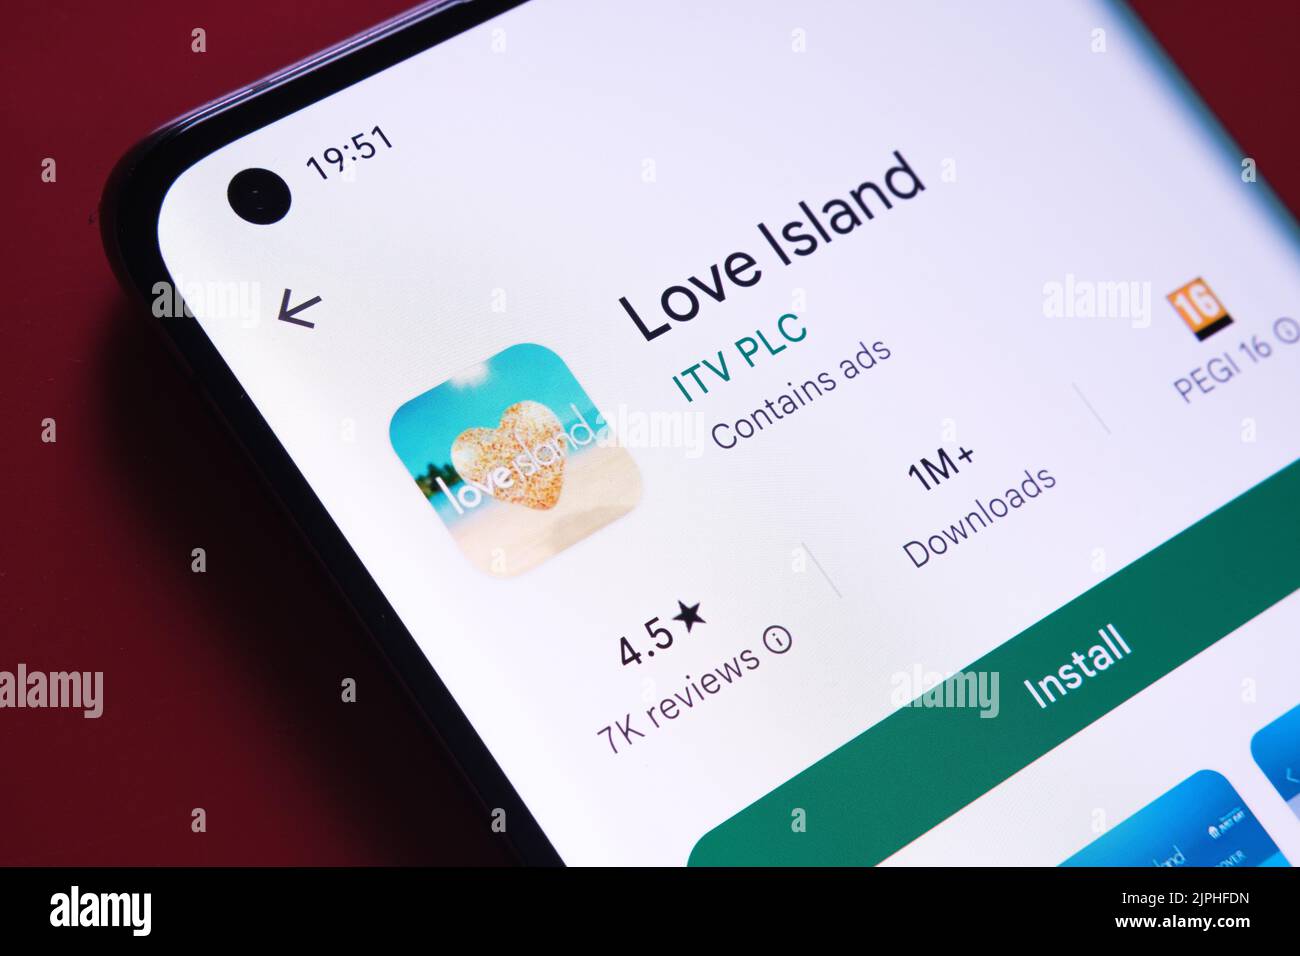 Love Island app seen in Google Play Store on the smartphone screen placed on red background. Close up photo with selective focus. Stafford, United Kin Stock Photo